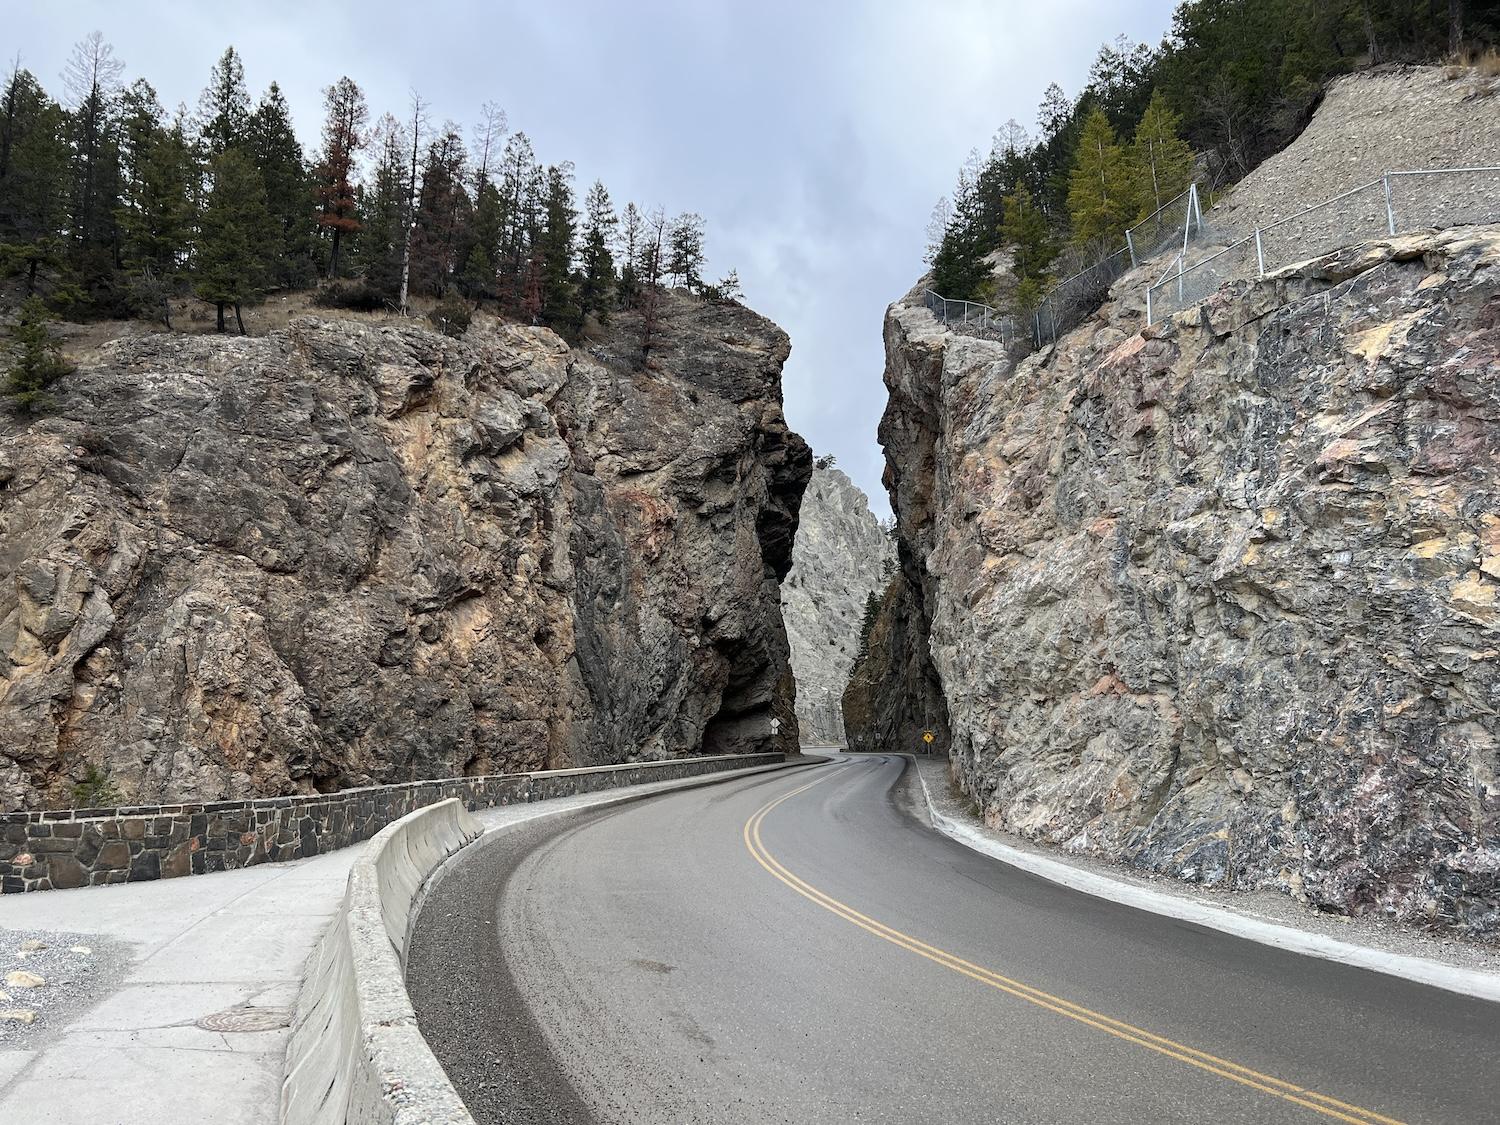 Just south of Radium Hot Springs is this spectacular stretch of highway at Sinclair Canyon.